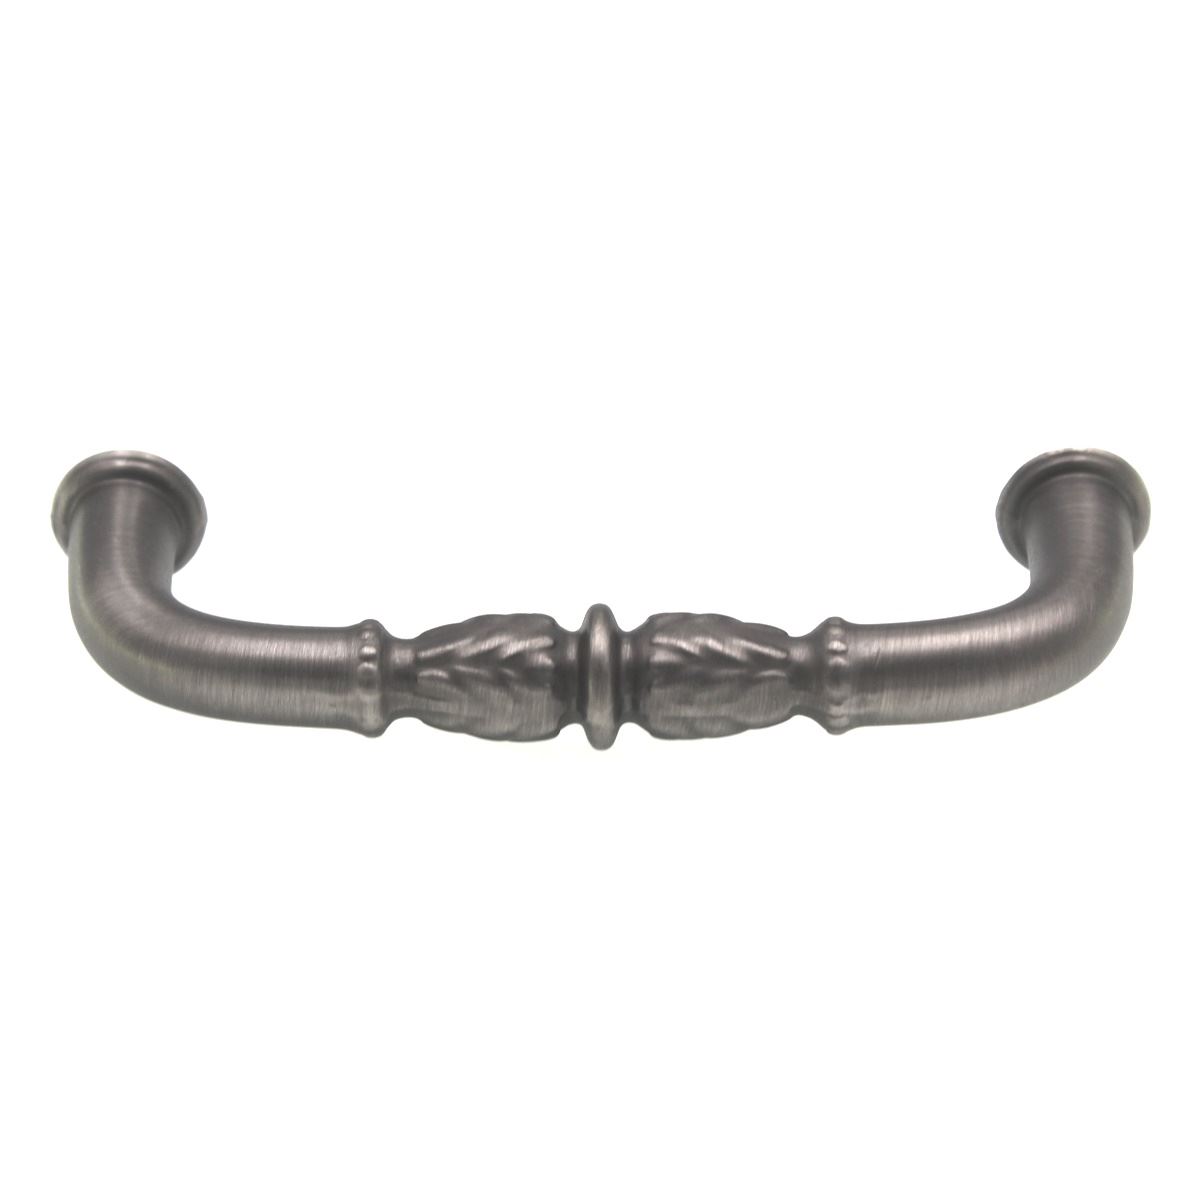 Schaub And Company Meridian Cabinet Pull 3 3/4" (96mm) Ctr Antique Nickel 801-AN